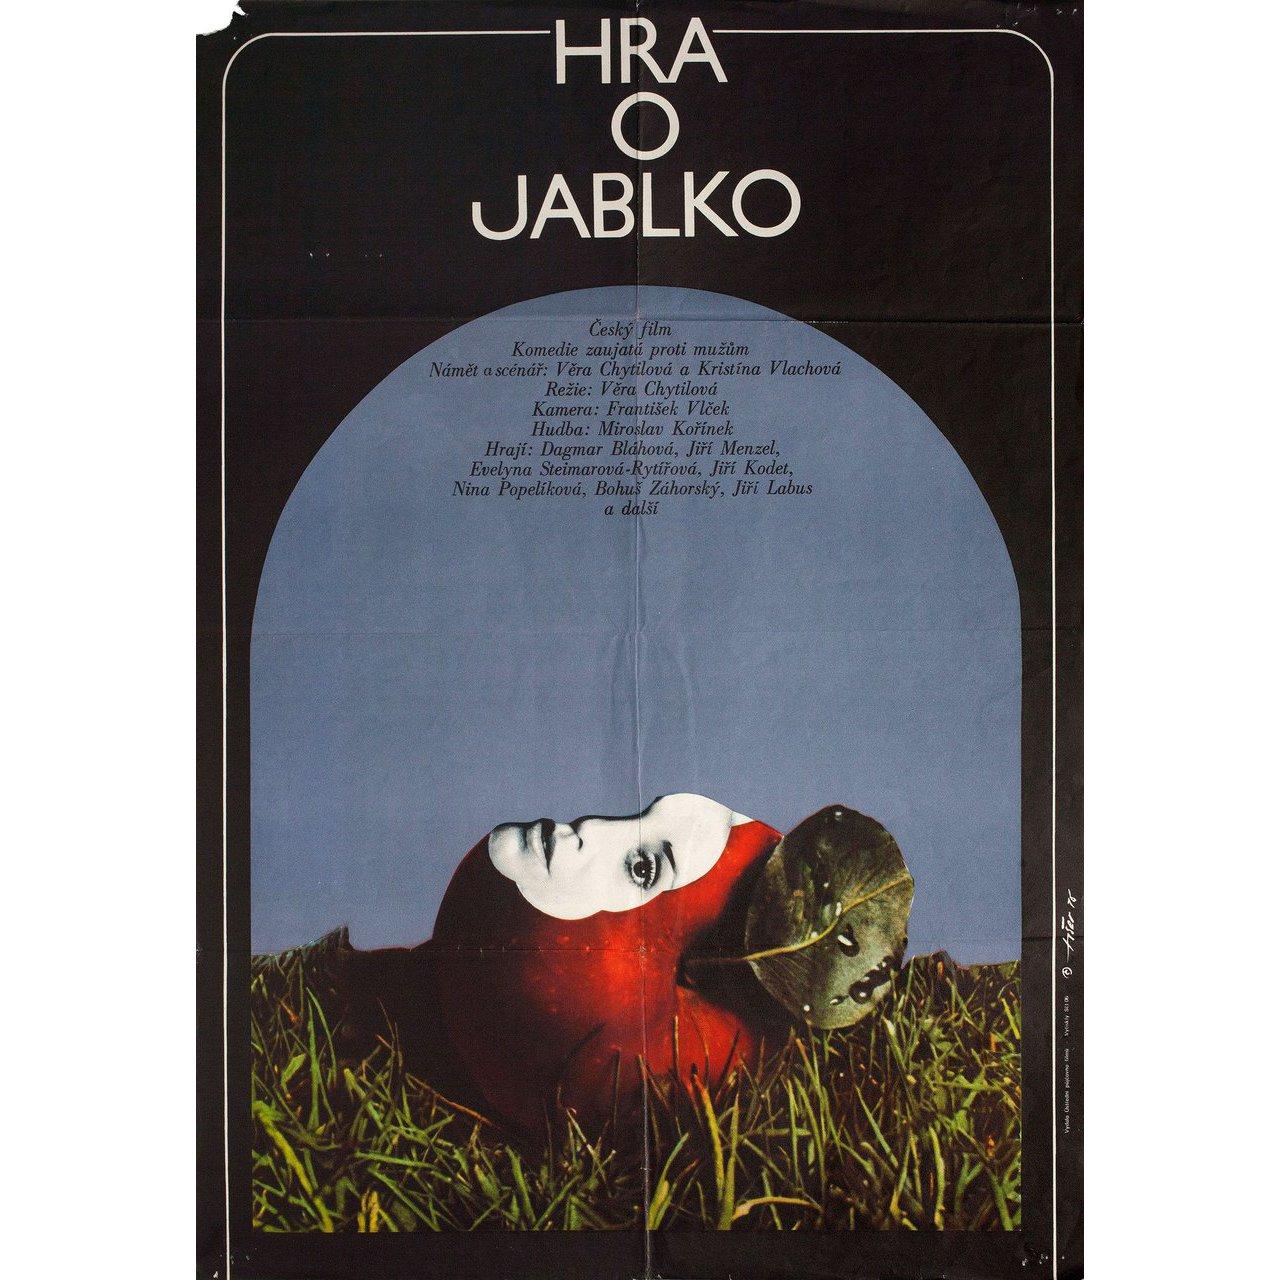 Original 1977 Czech A1 poster by Jaroslav Fiser for. Very good condition, folded. Many original posters were issued folded or were subsequently folded. Please note: the size is stated in inches and the actual size can vary by an inch or more.
   